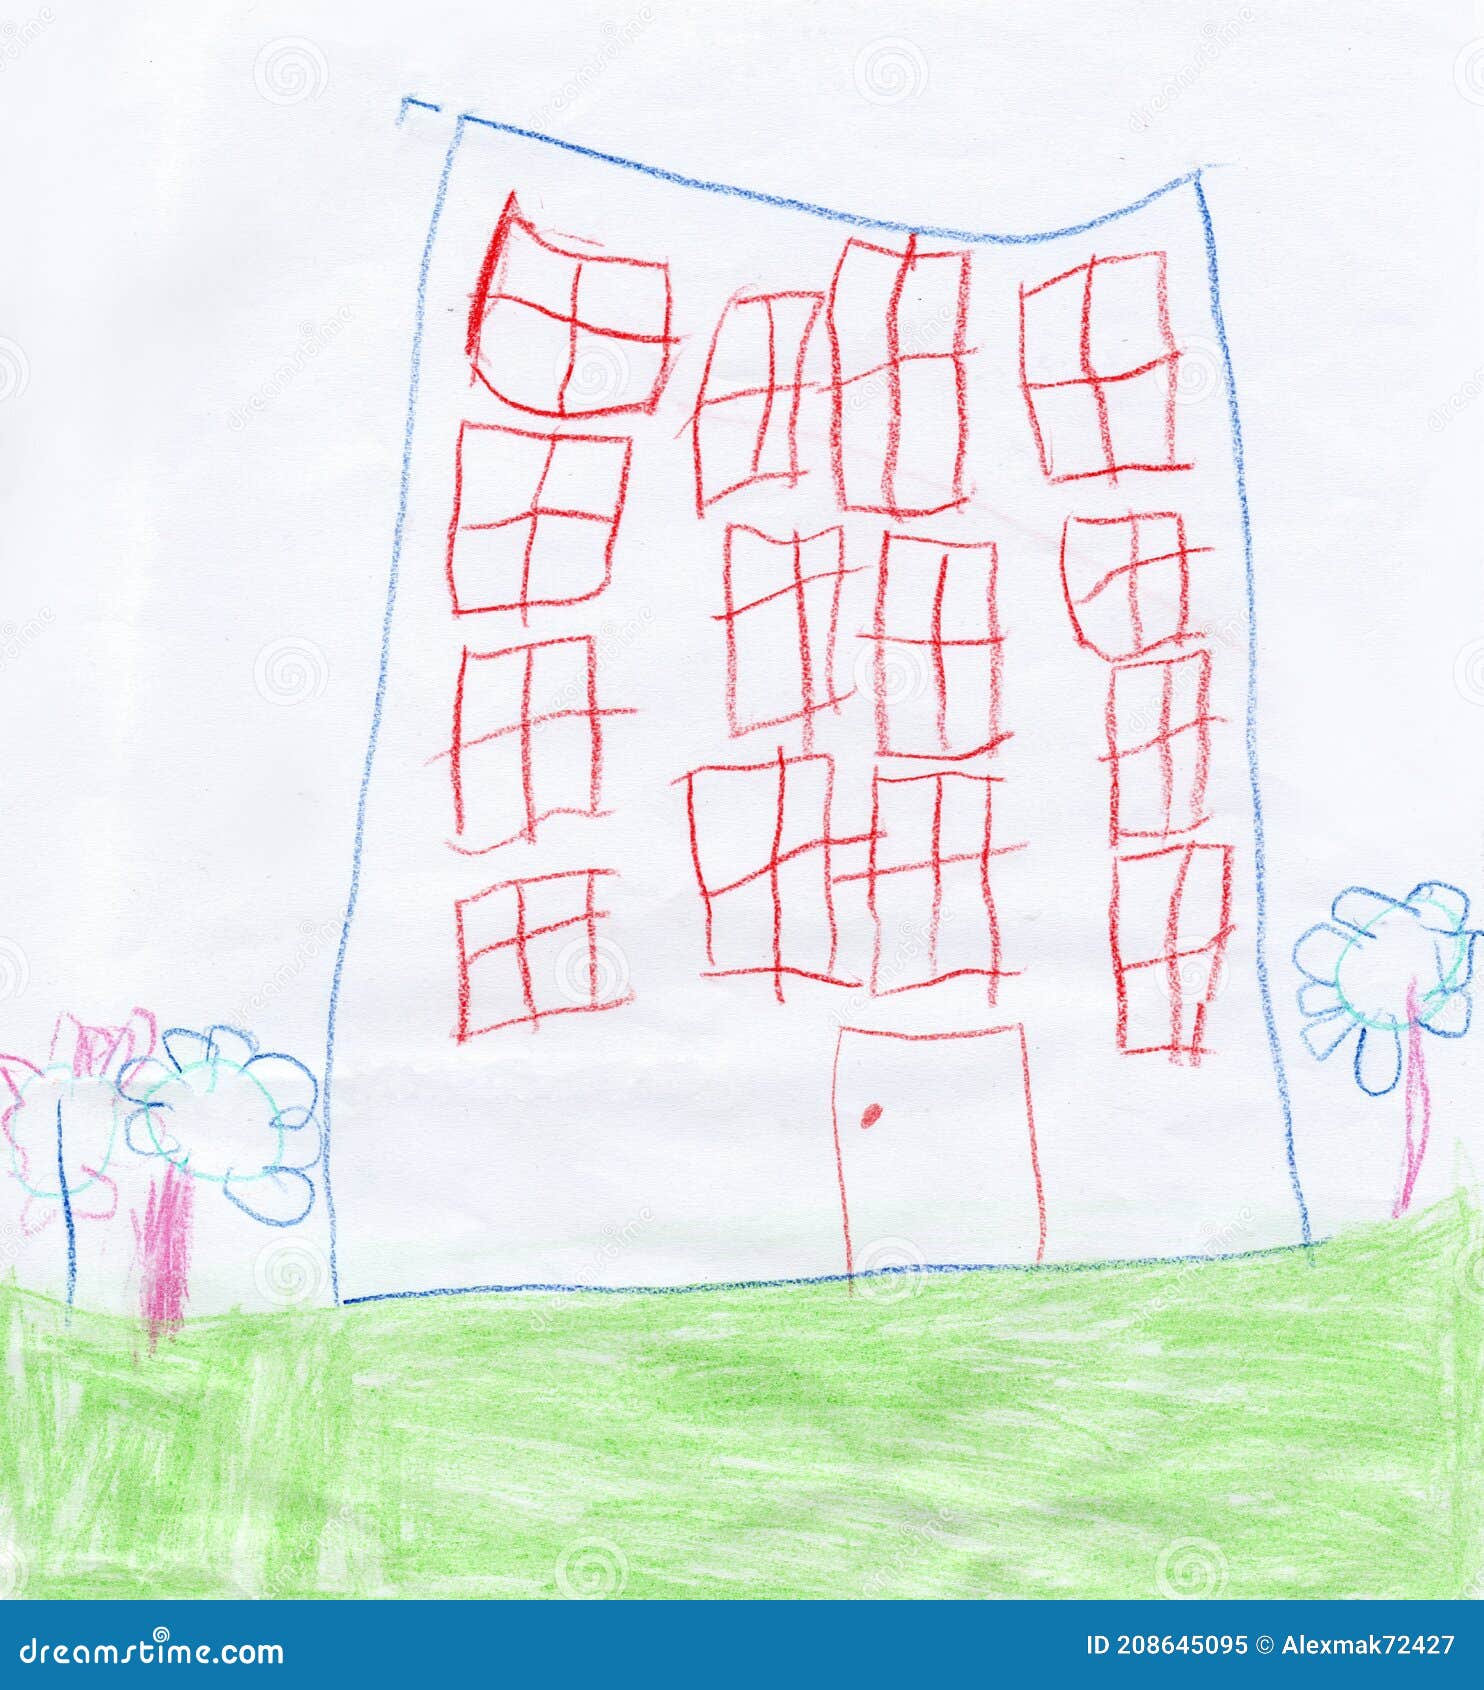 How To Draw Buildings Step By Step  For Kids  Beginners